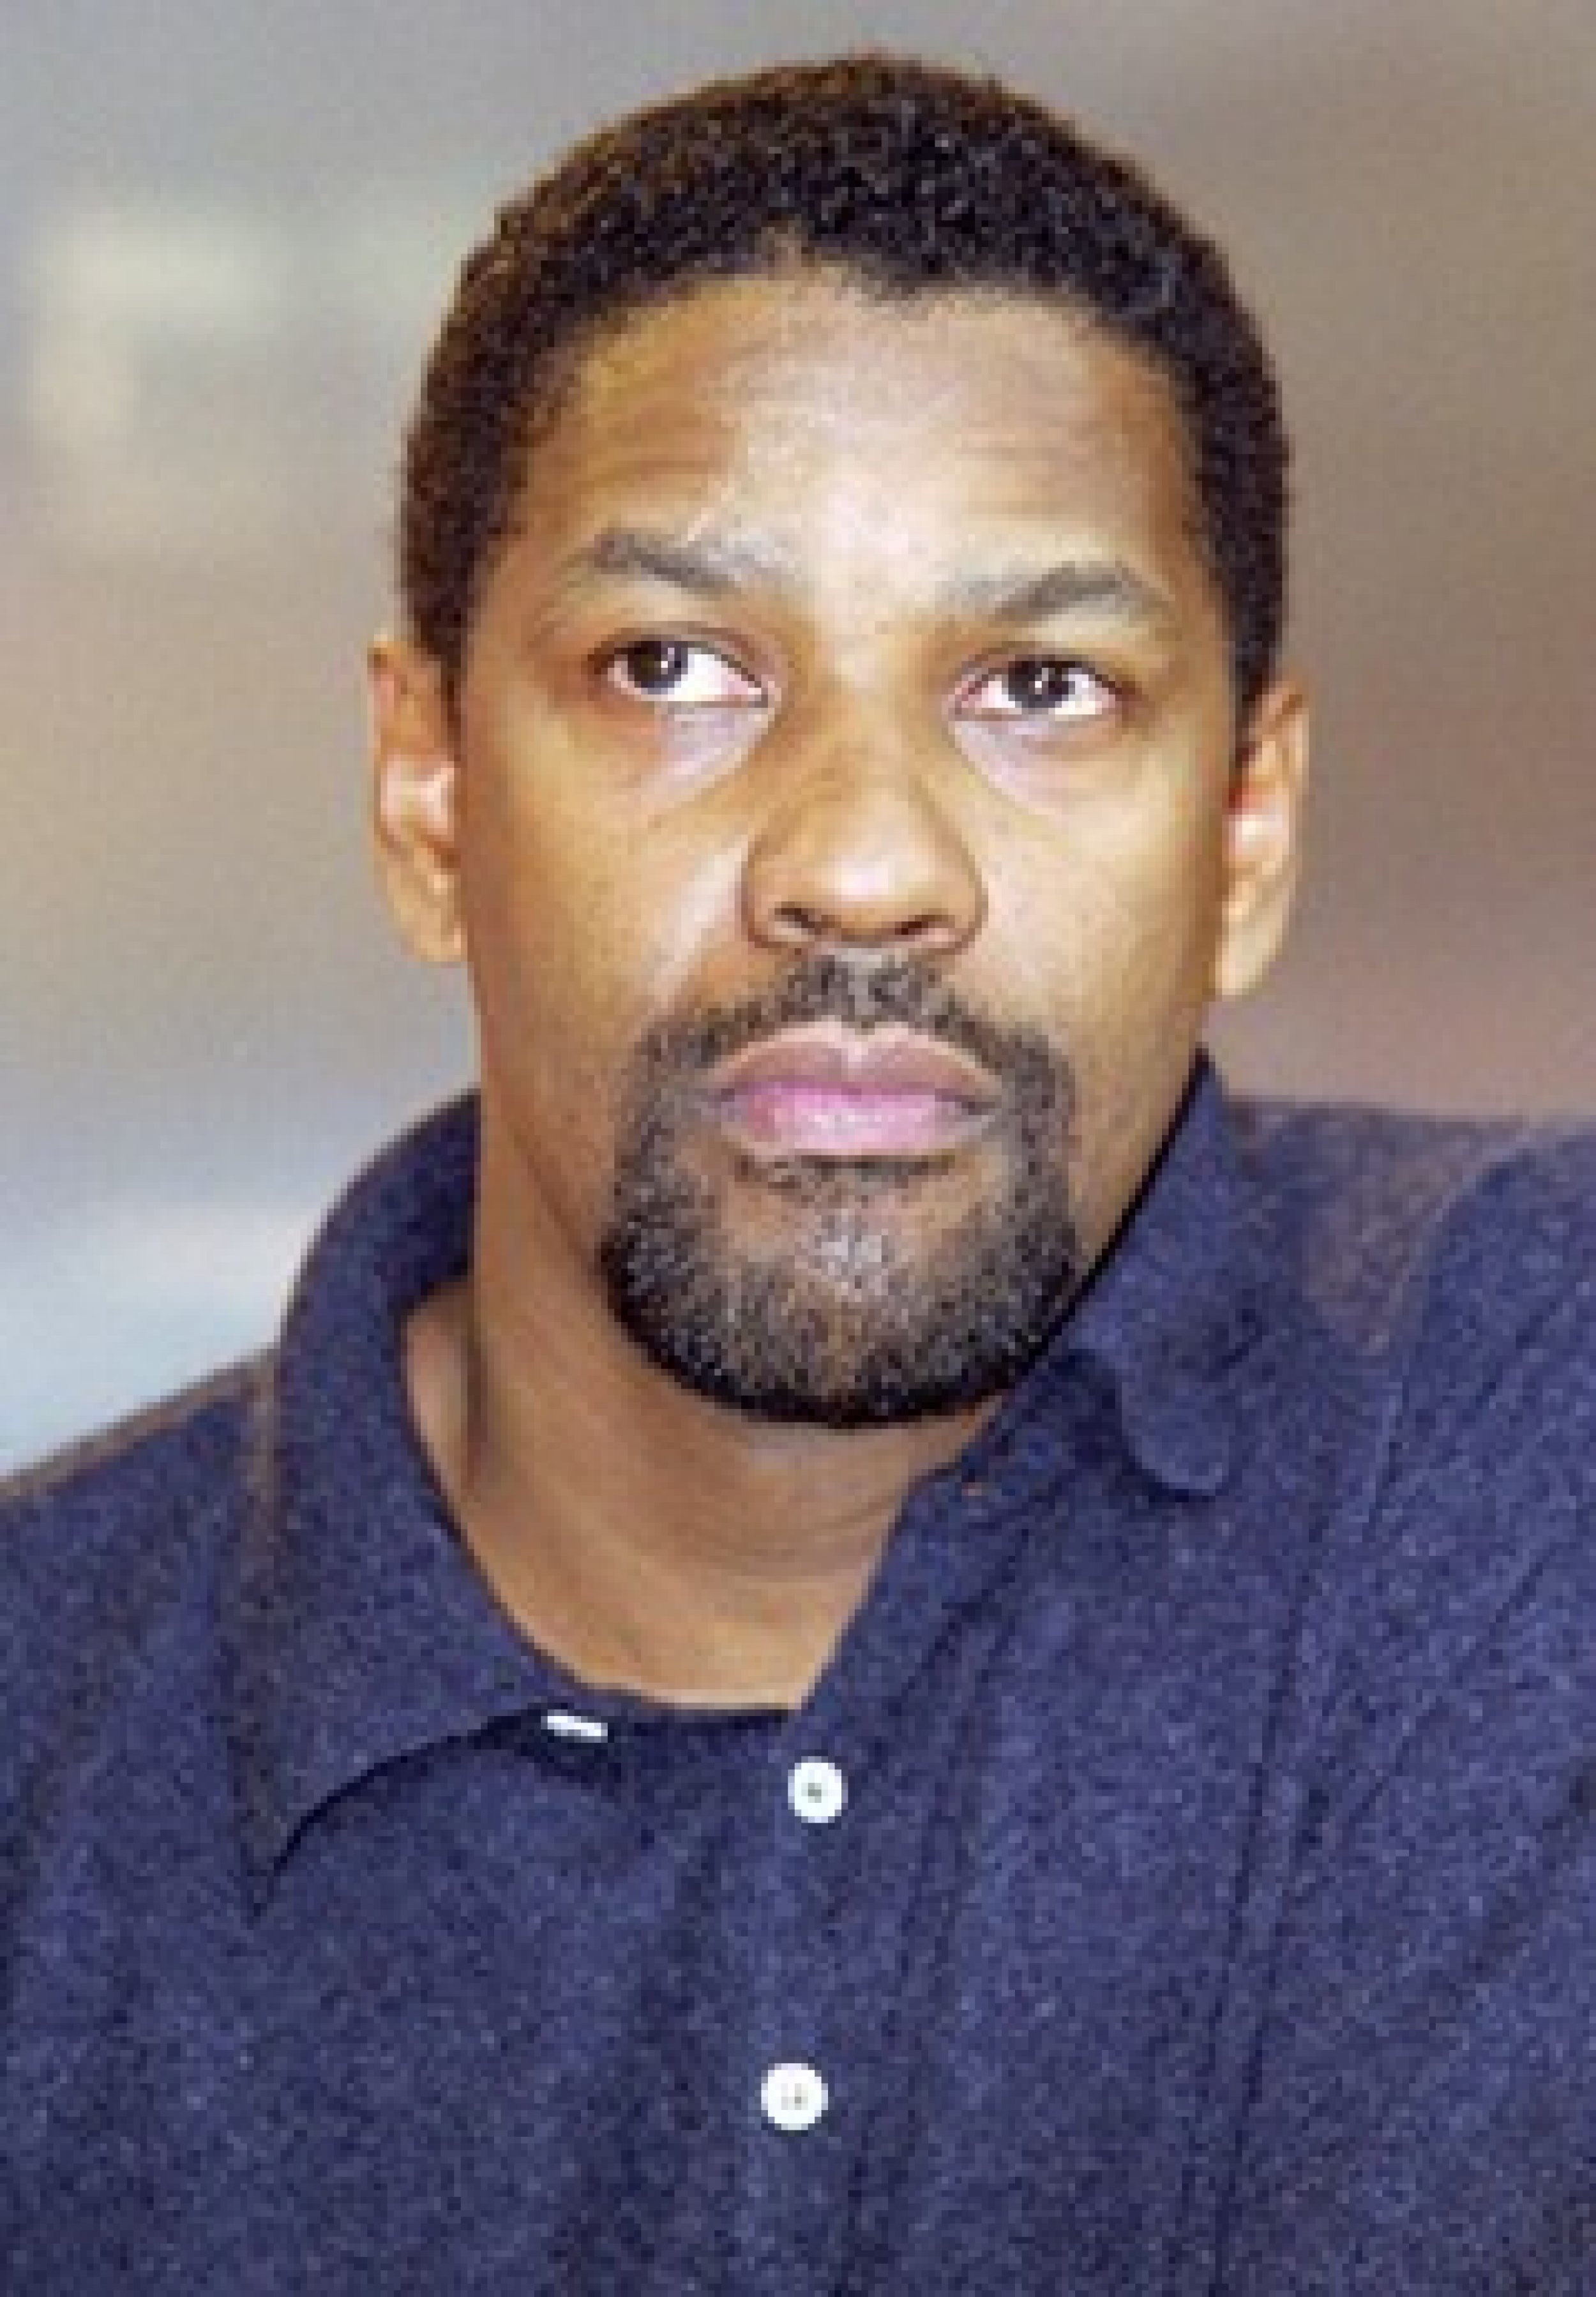 Denzel Washington Ranks 5 in Forbes List of Hollywoods Most Overpaid Actors